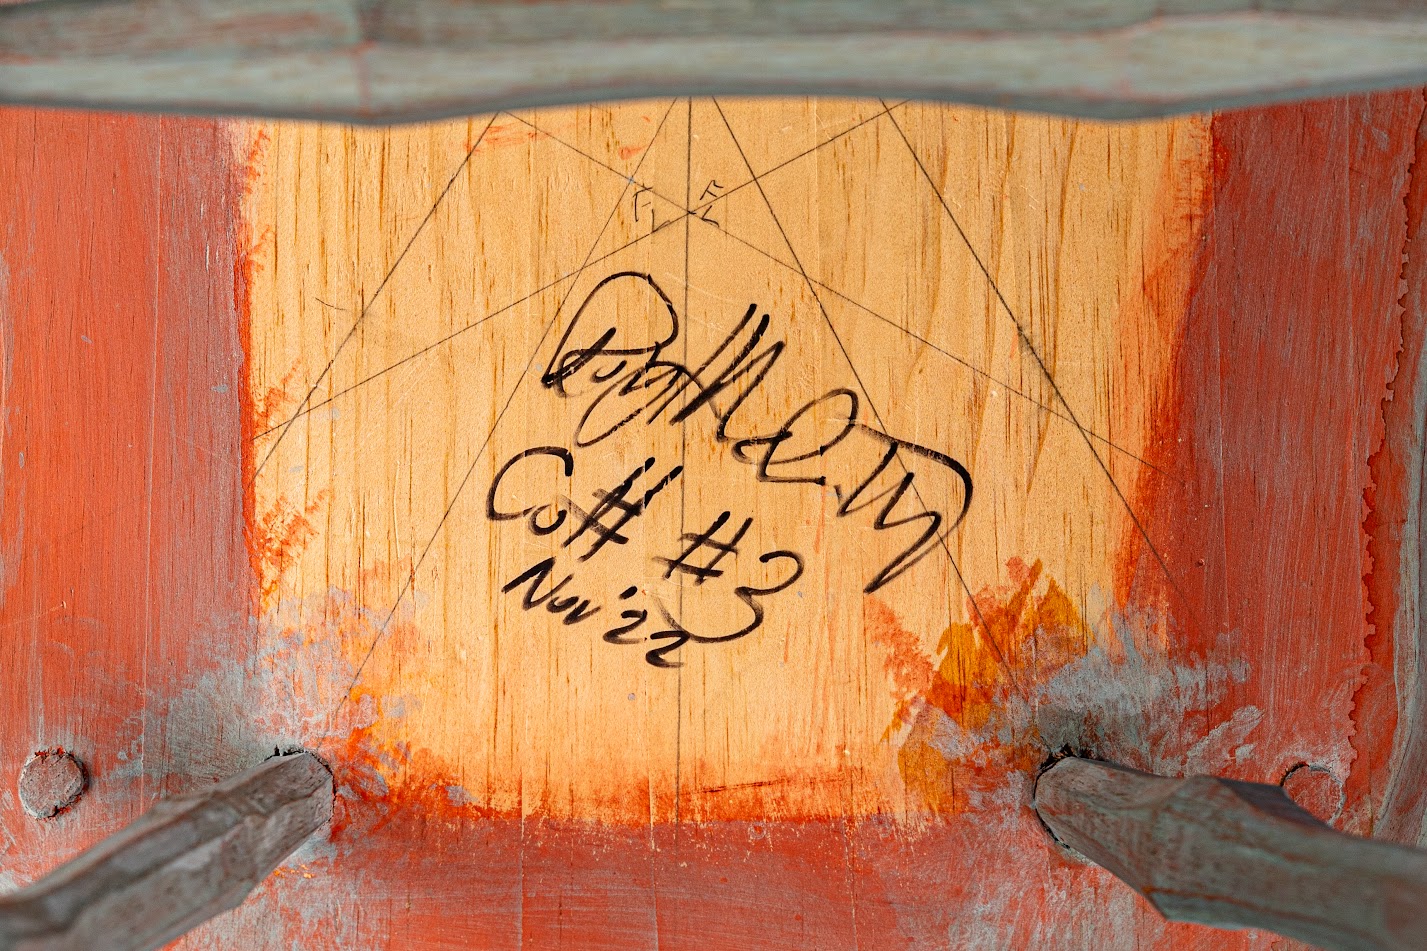 Underside of Chair of Honor, autographed by Roy